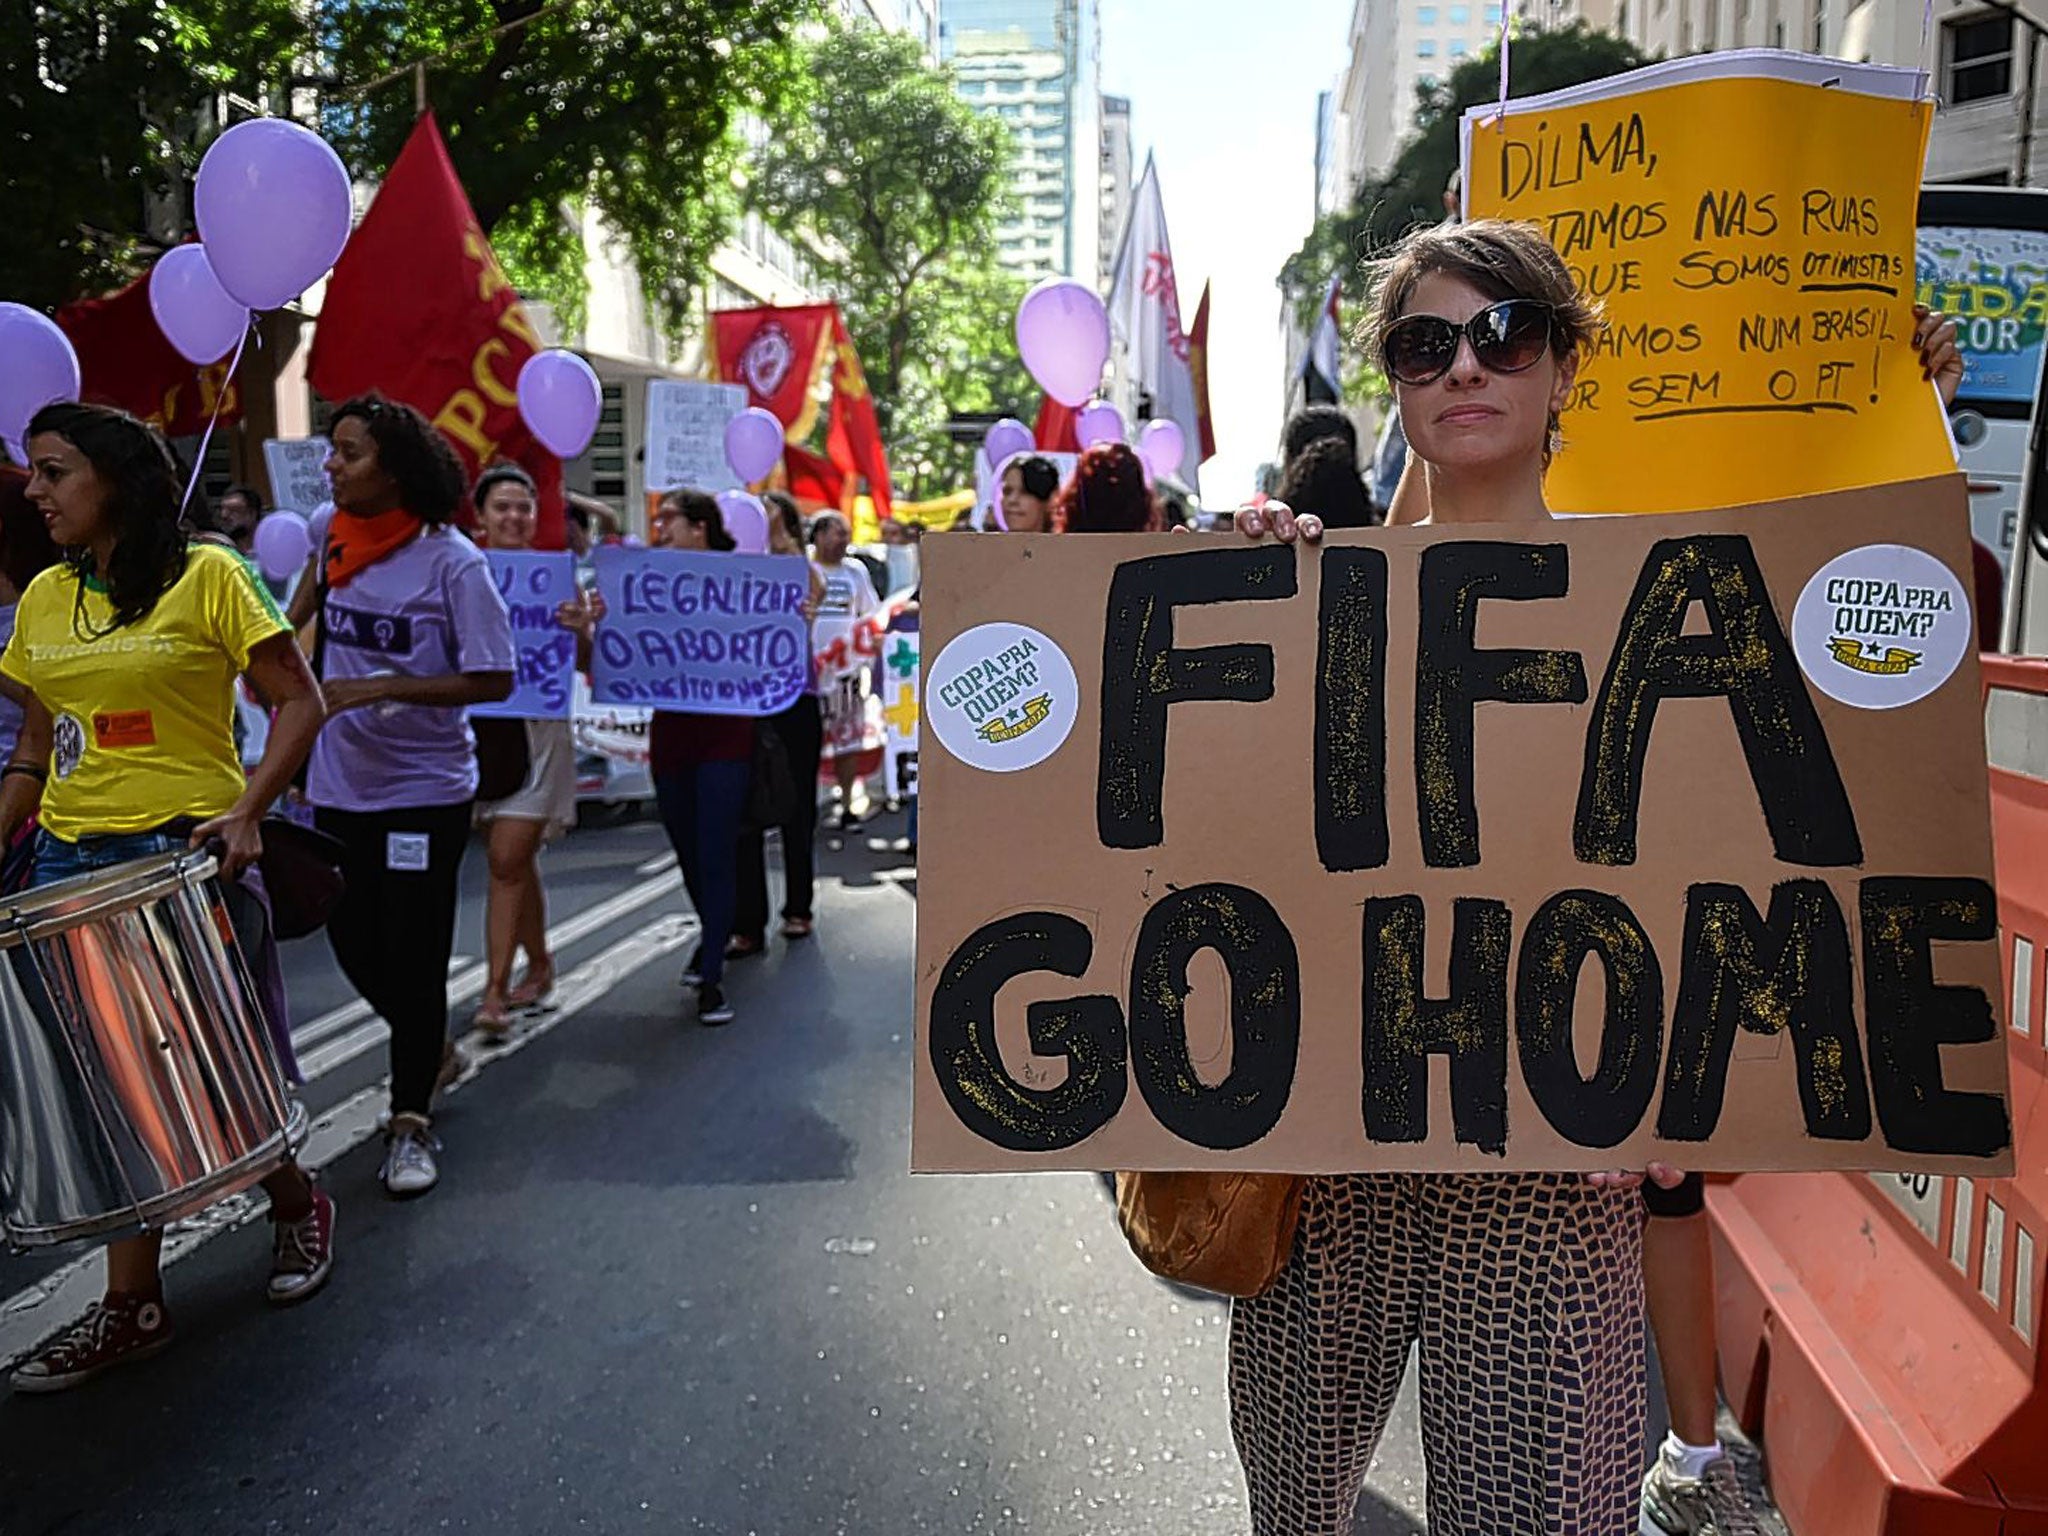 Fifa has created a World Cup so costly and authoritarian that hundreds of thousands of Brazilians have protested against it